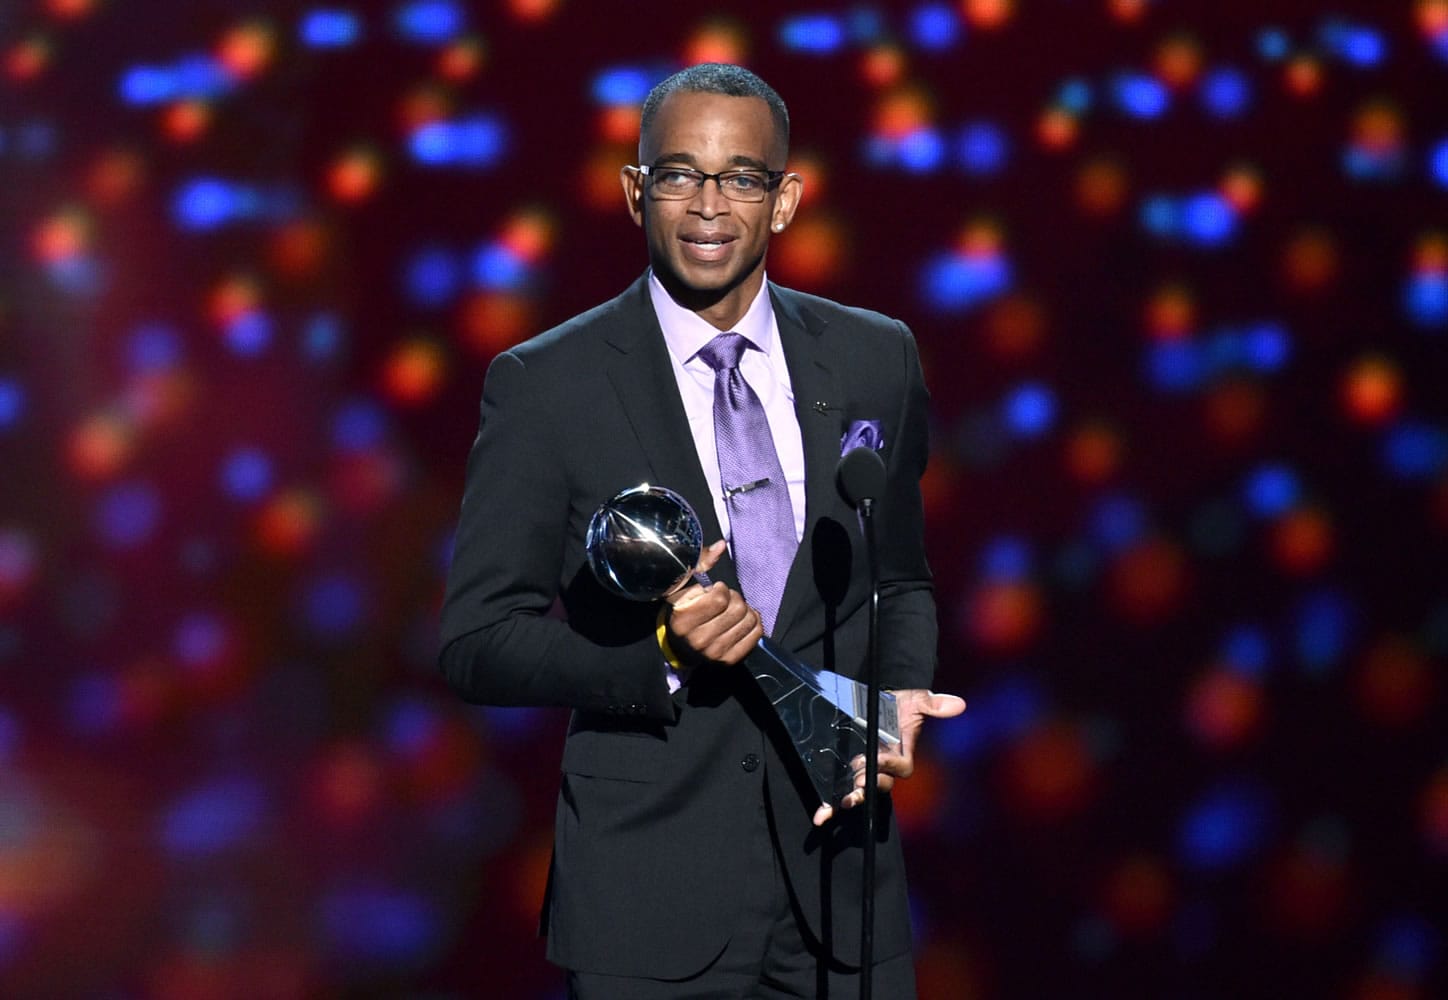 ESPN sportscaster Stuart Scott accepts the Jimmy V award for perseverance, at the ESPY Awards on July 16, 2014, at the Nokia Theatre, in Los Angeles. Scott, the longtime &quot;SportsCenter&quot; anchor and ESPN personality known for his known for his enthusiasm and ubiquity, died Sunday, Jan. 4, 2015 after a long fight with cancer. He was 49.